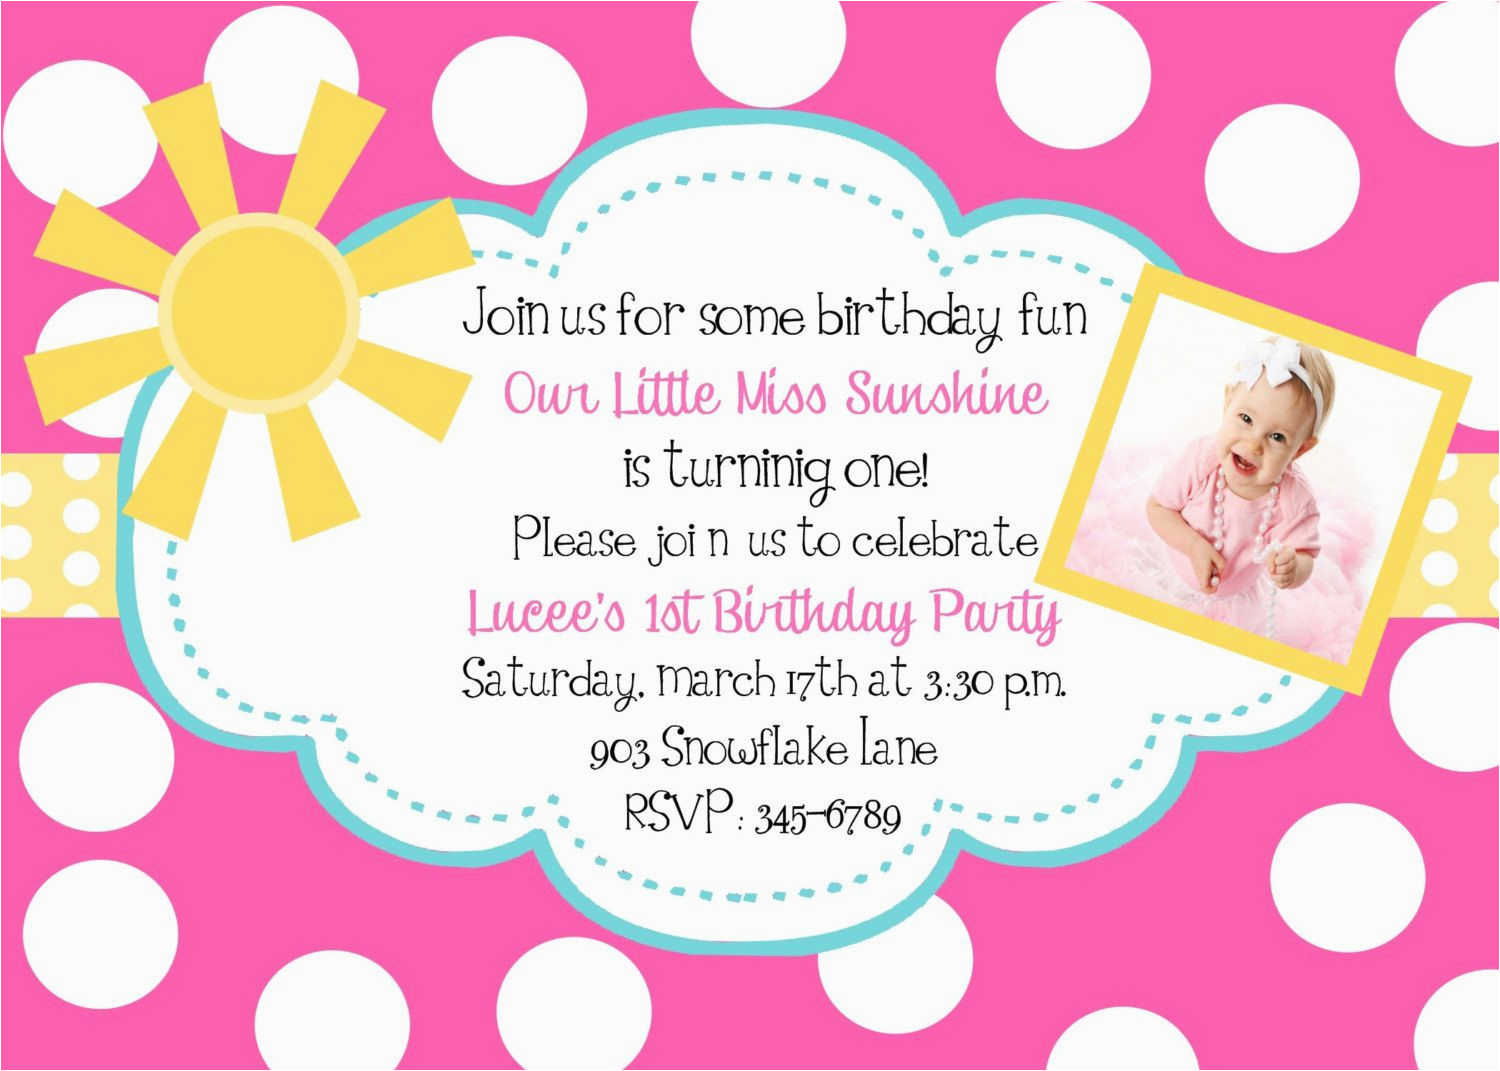 Invite To Birthday Party Wording 10 Simple Birthday Party Invitations 